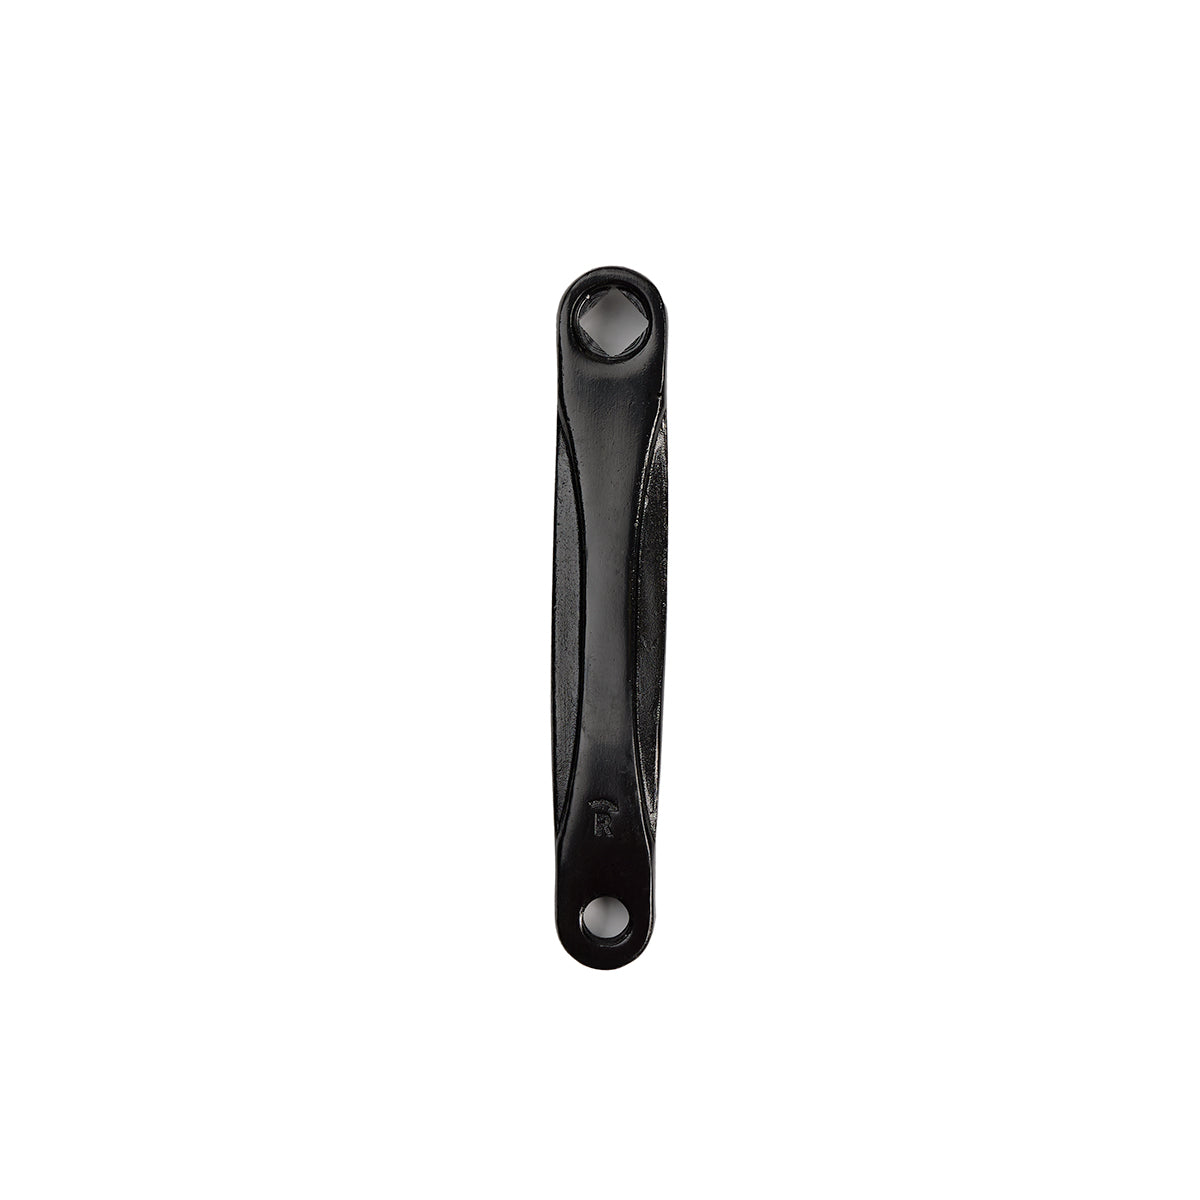 Indoor Cycle Bike Crank Arm2 - Available in Right or Left Side - 5/8